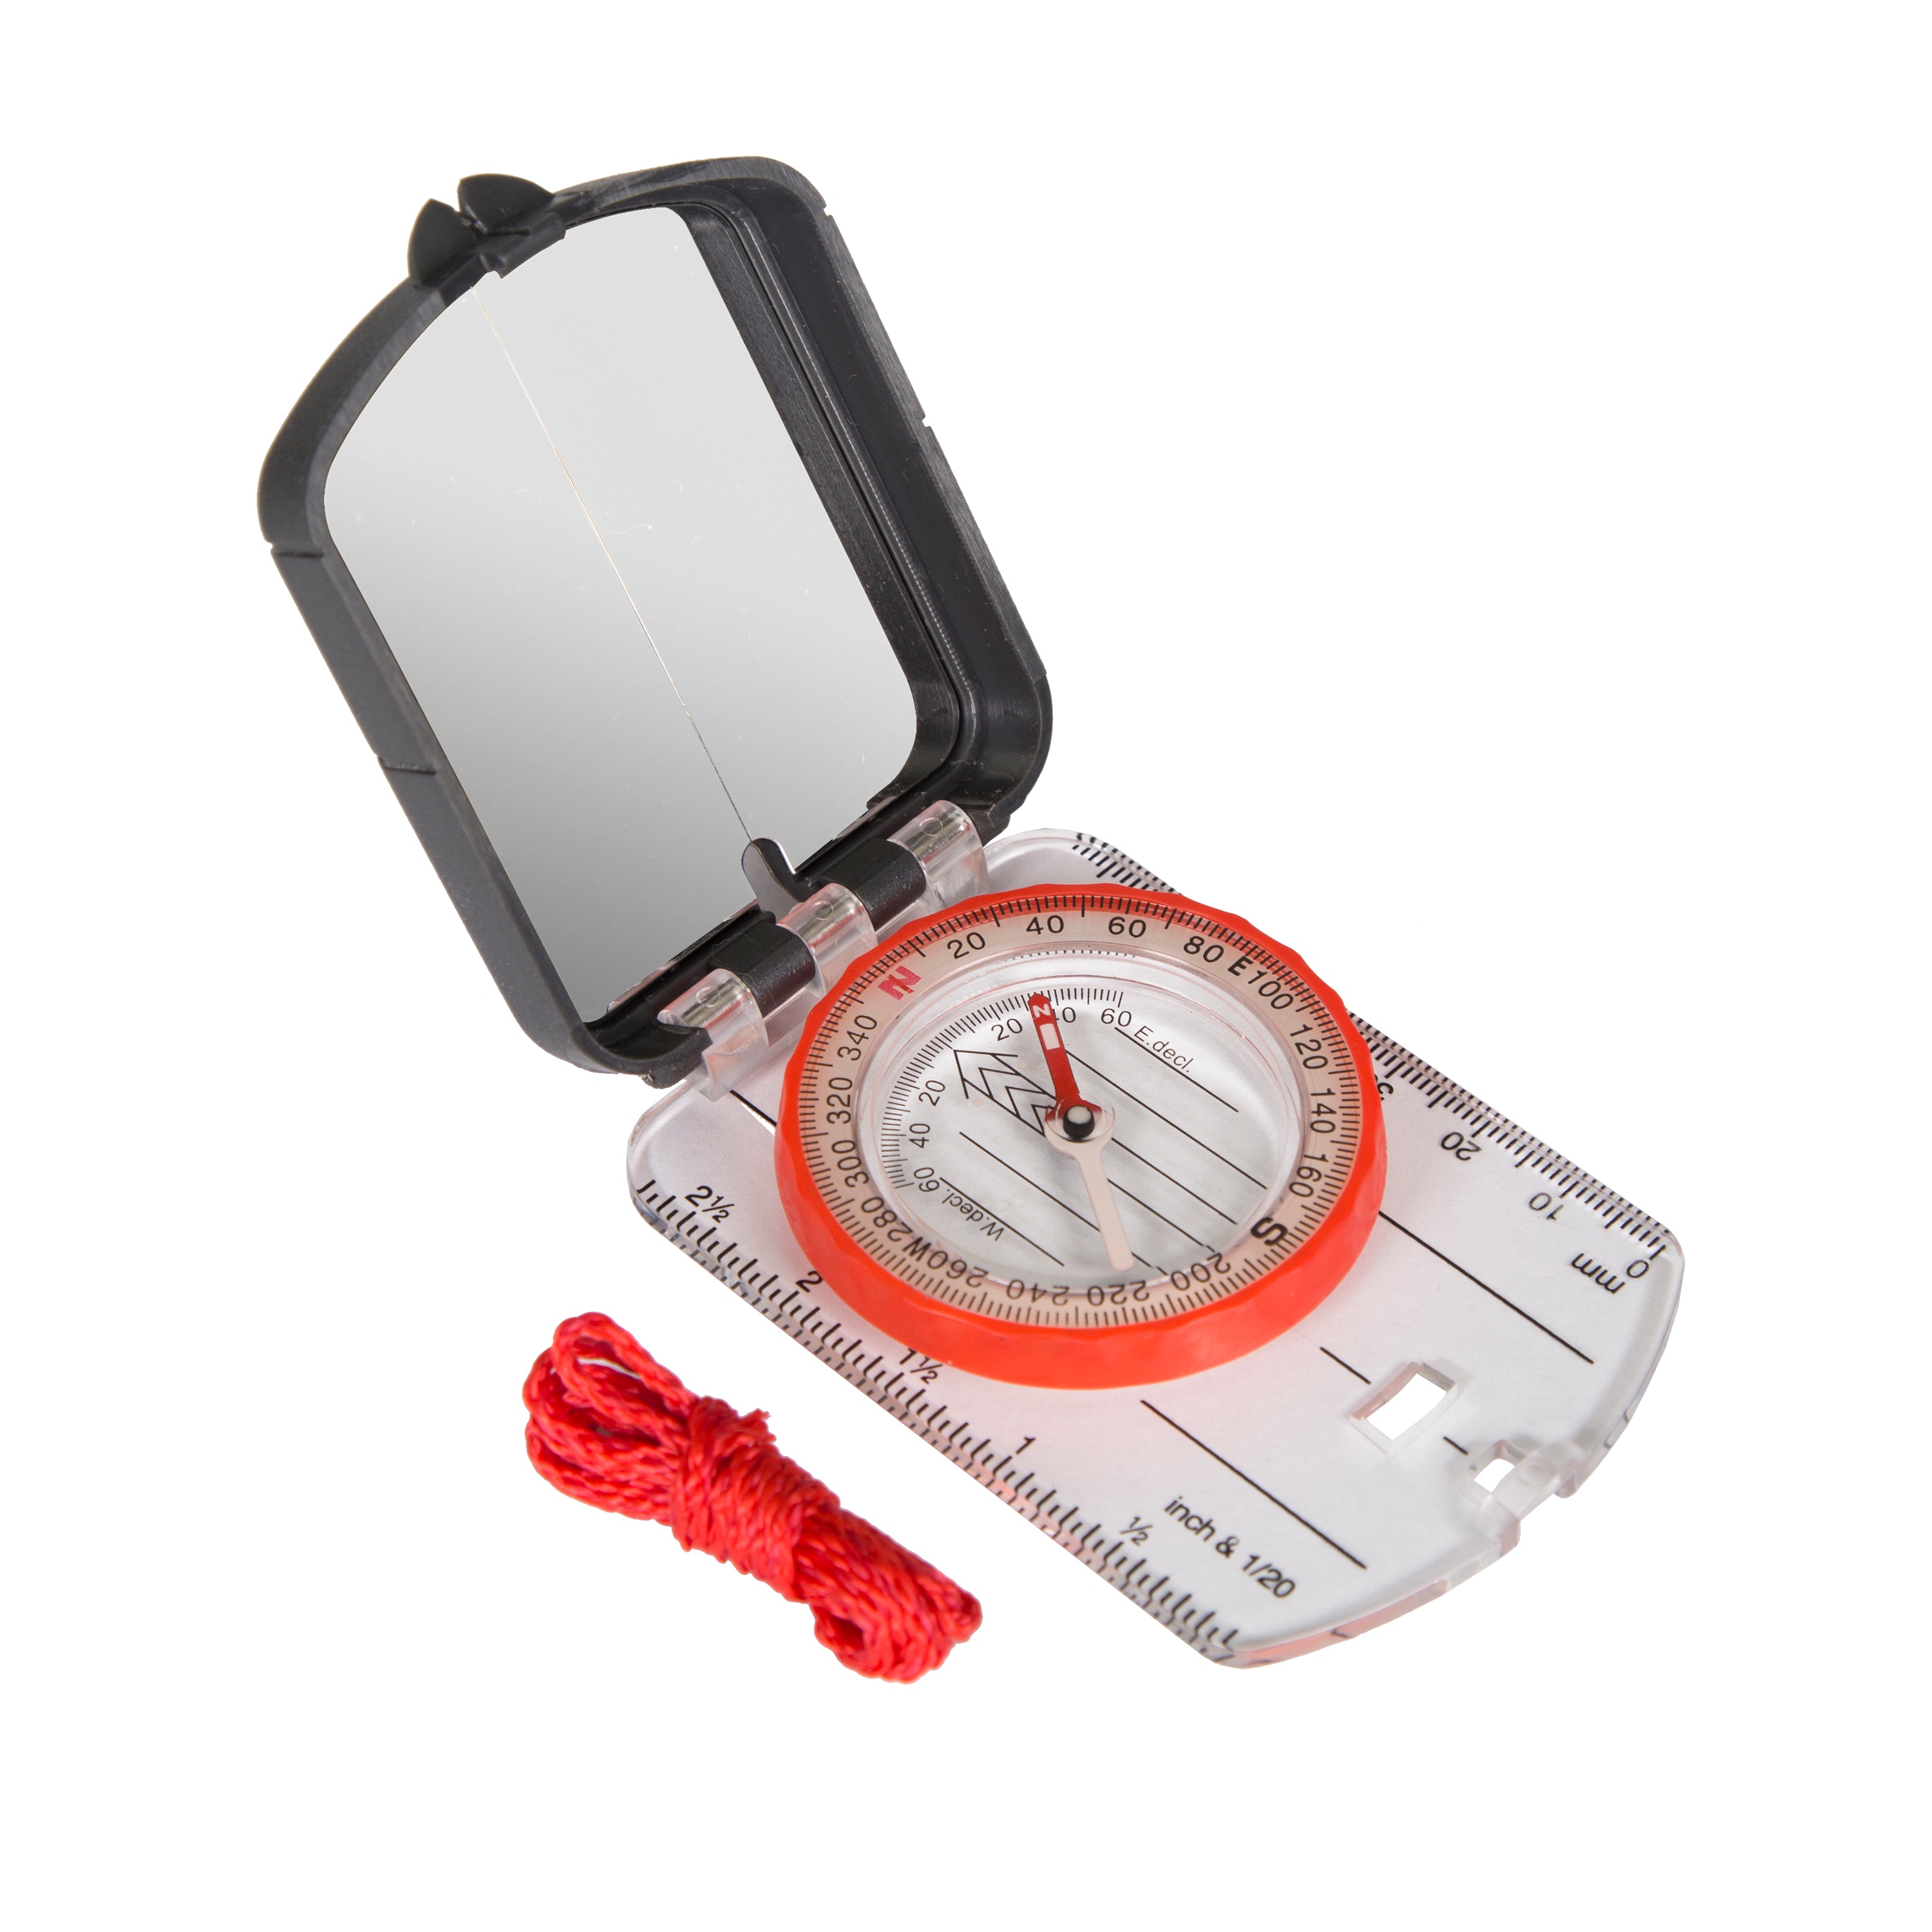 Deluxe Multi Function Compass With Mirror-eSafety Supplies, Inc